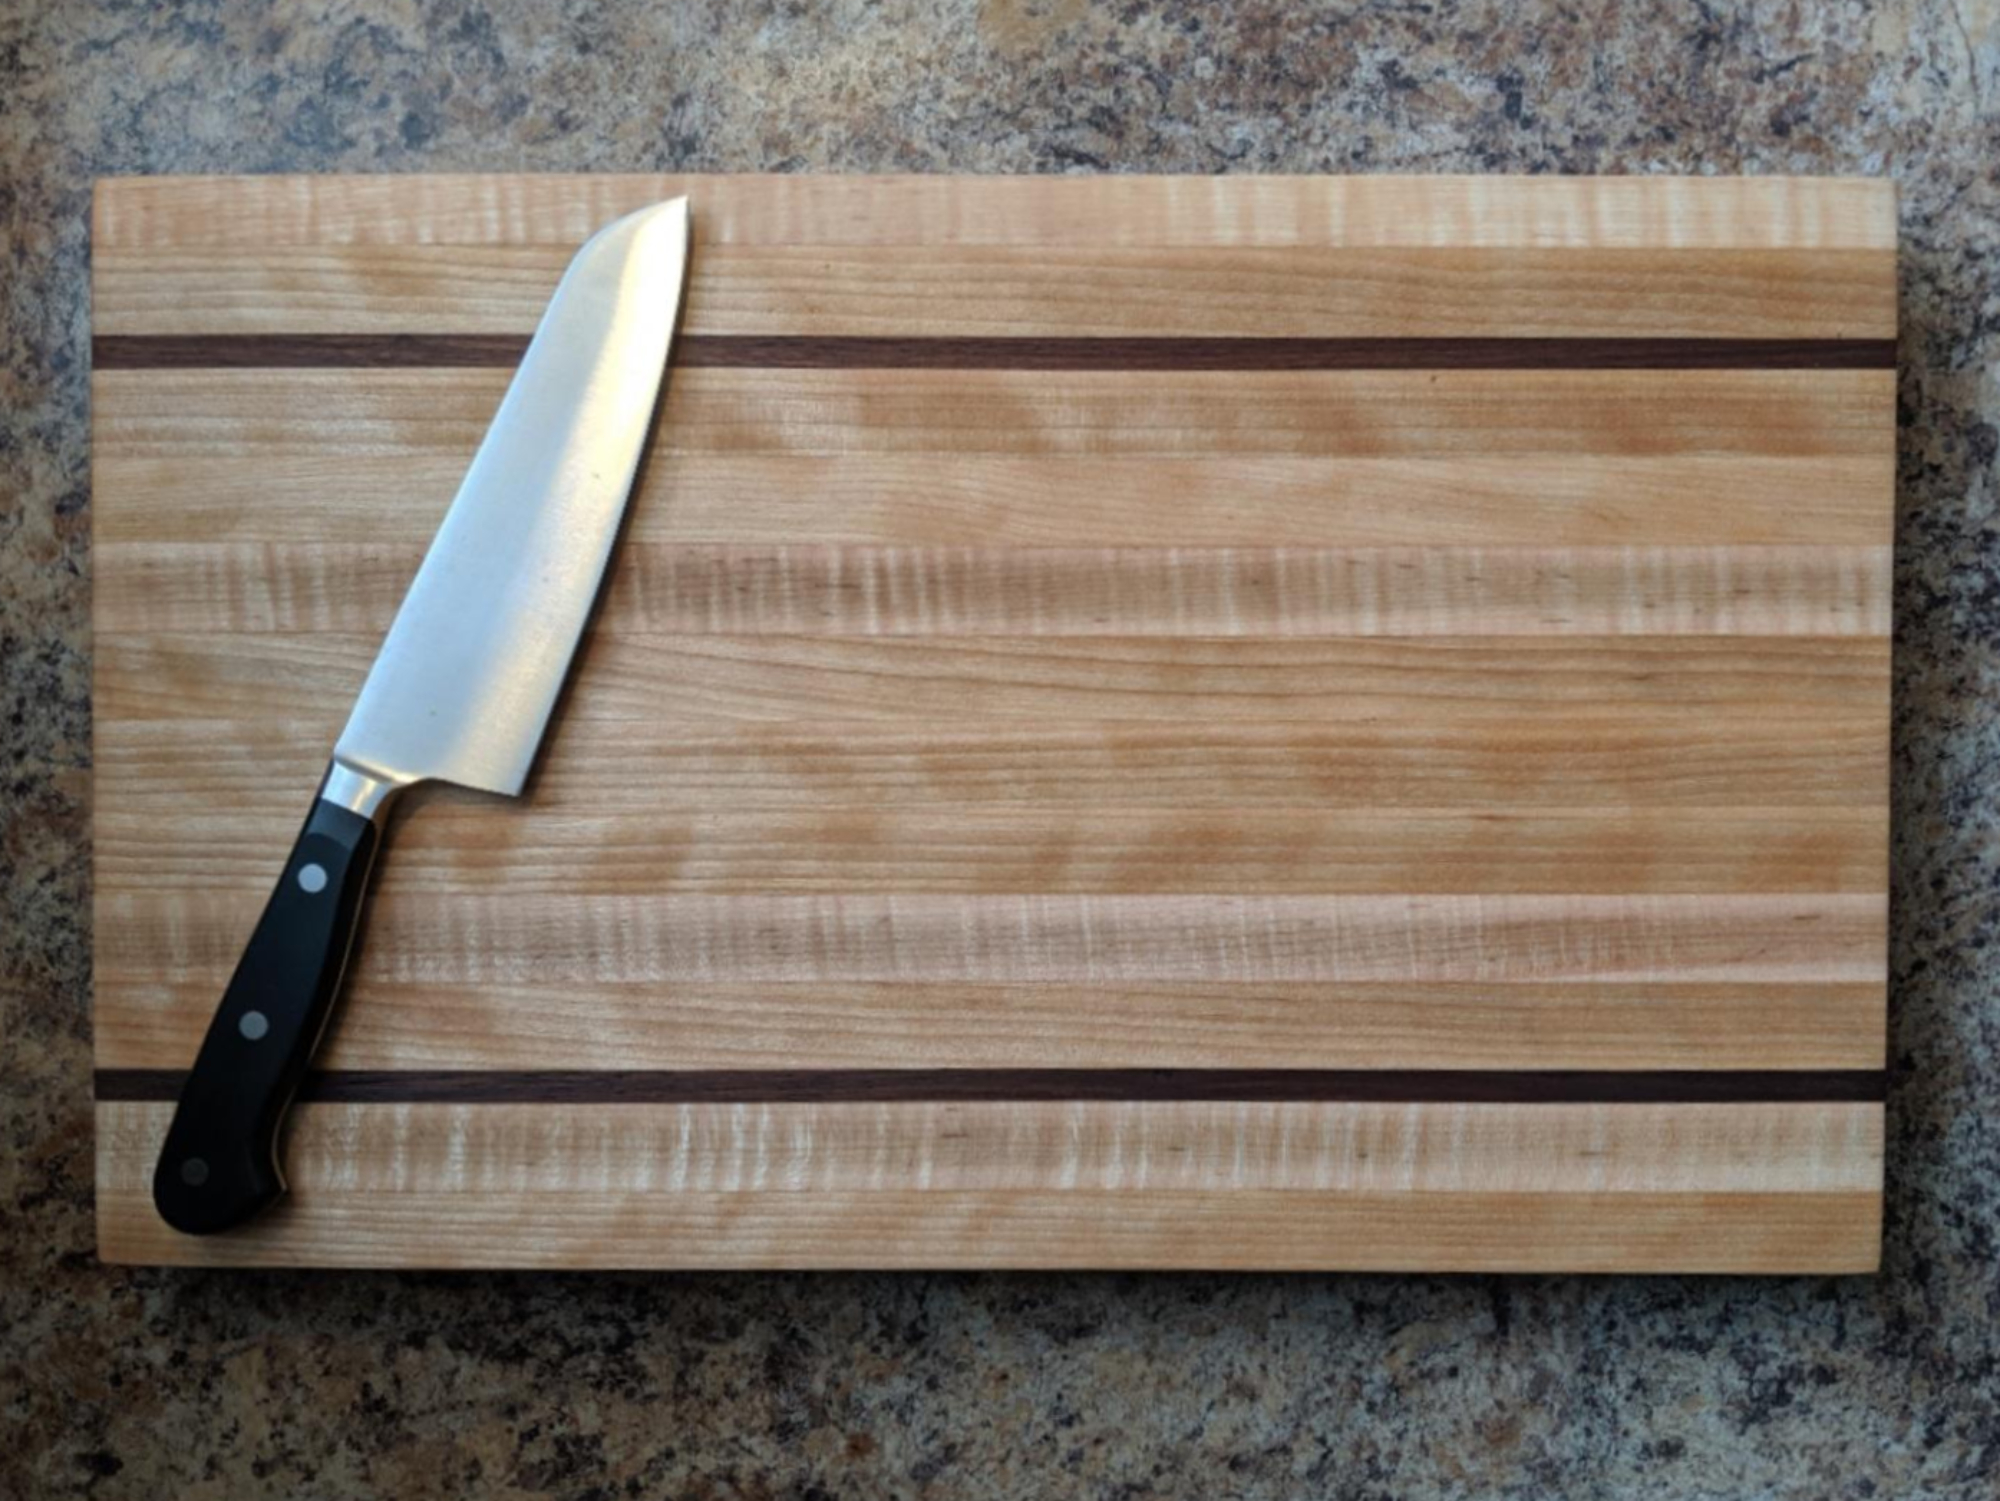 4 simple ways to upgrade your boring DIY cutting boards